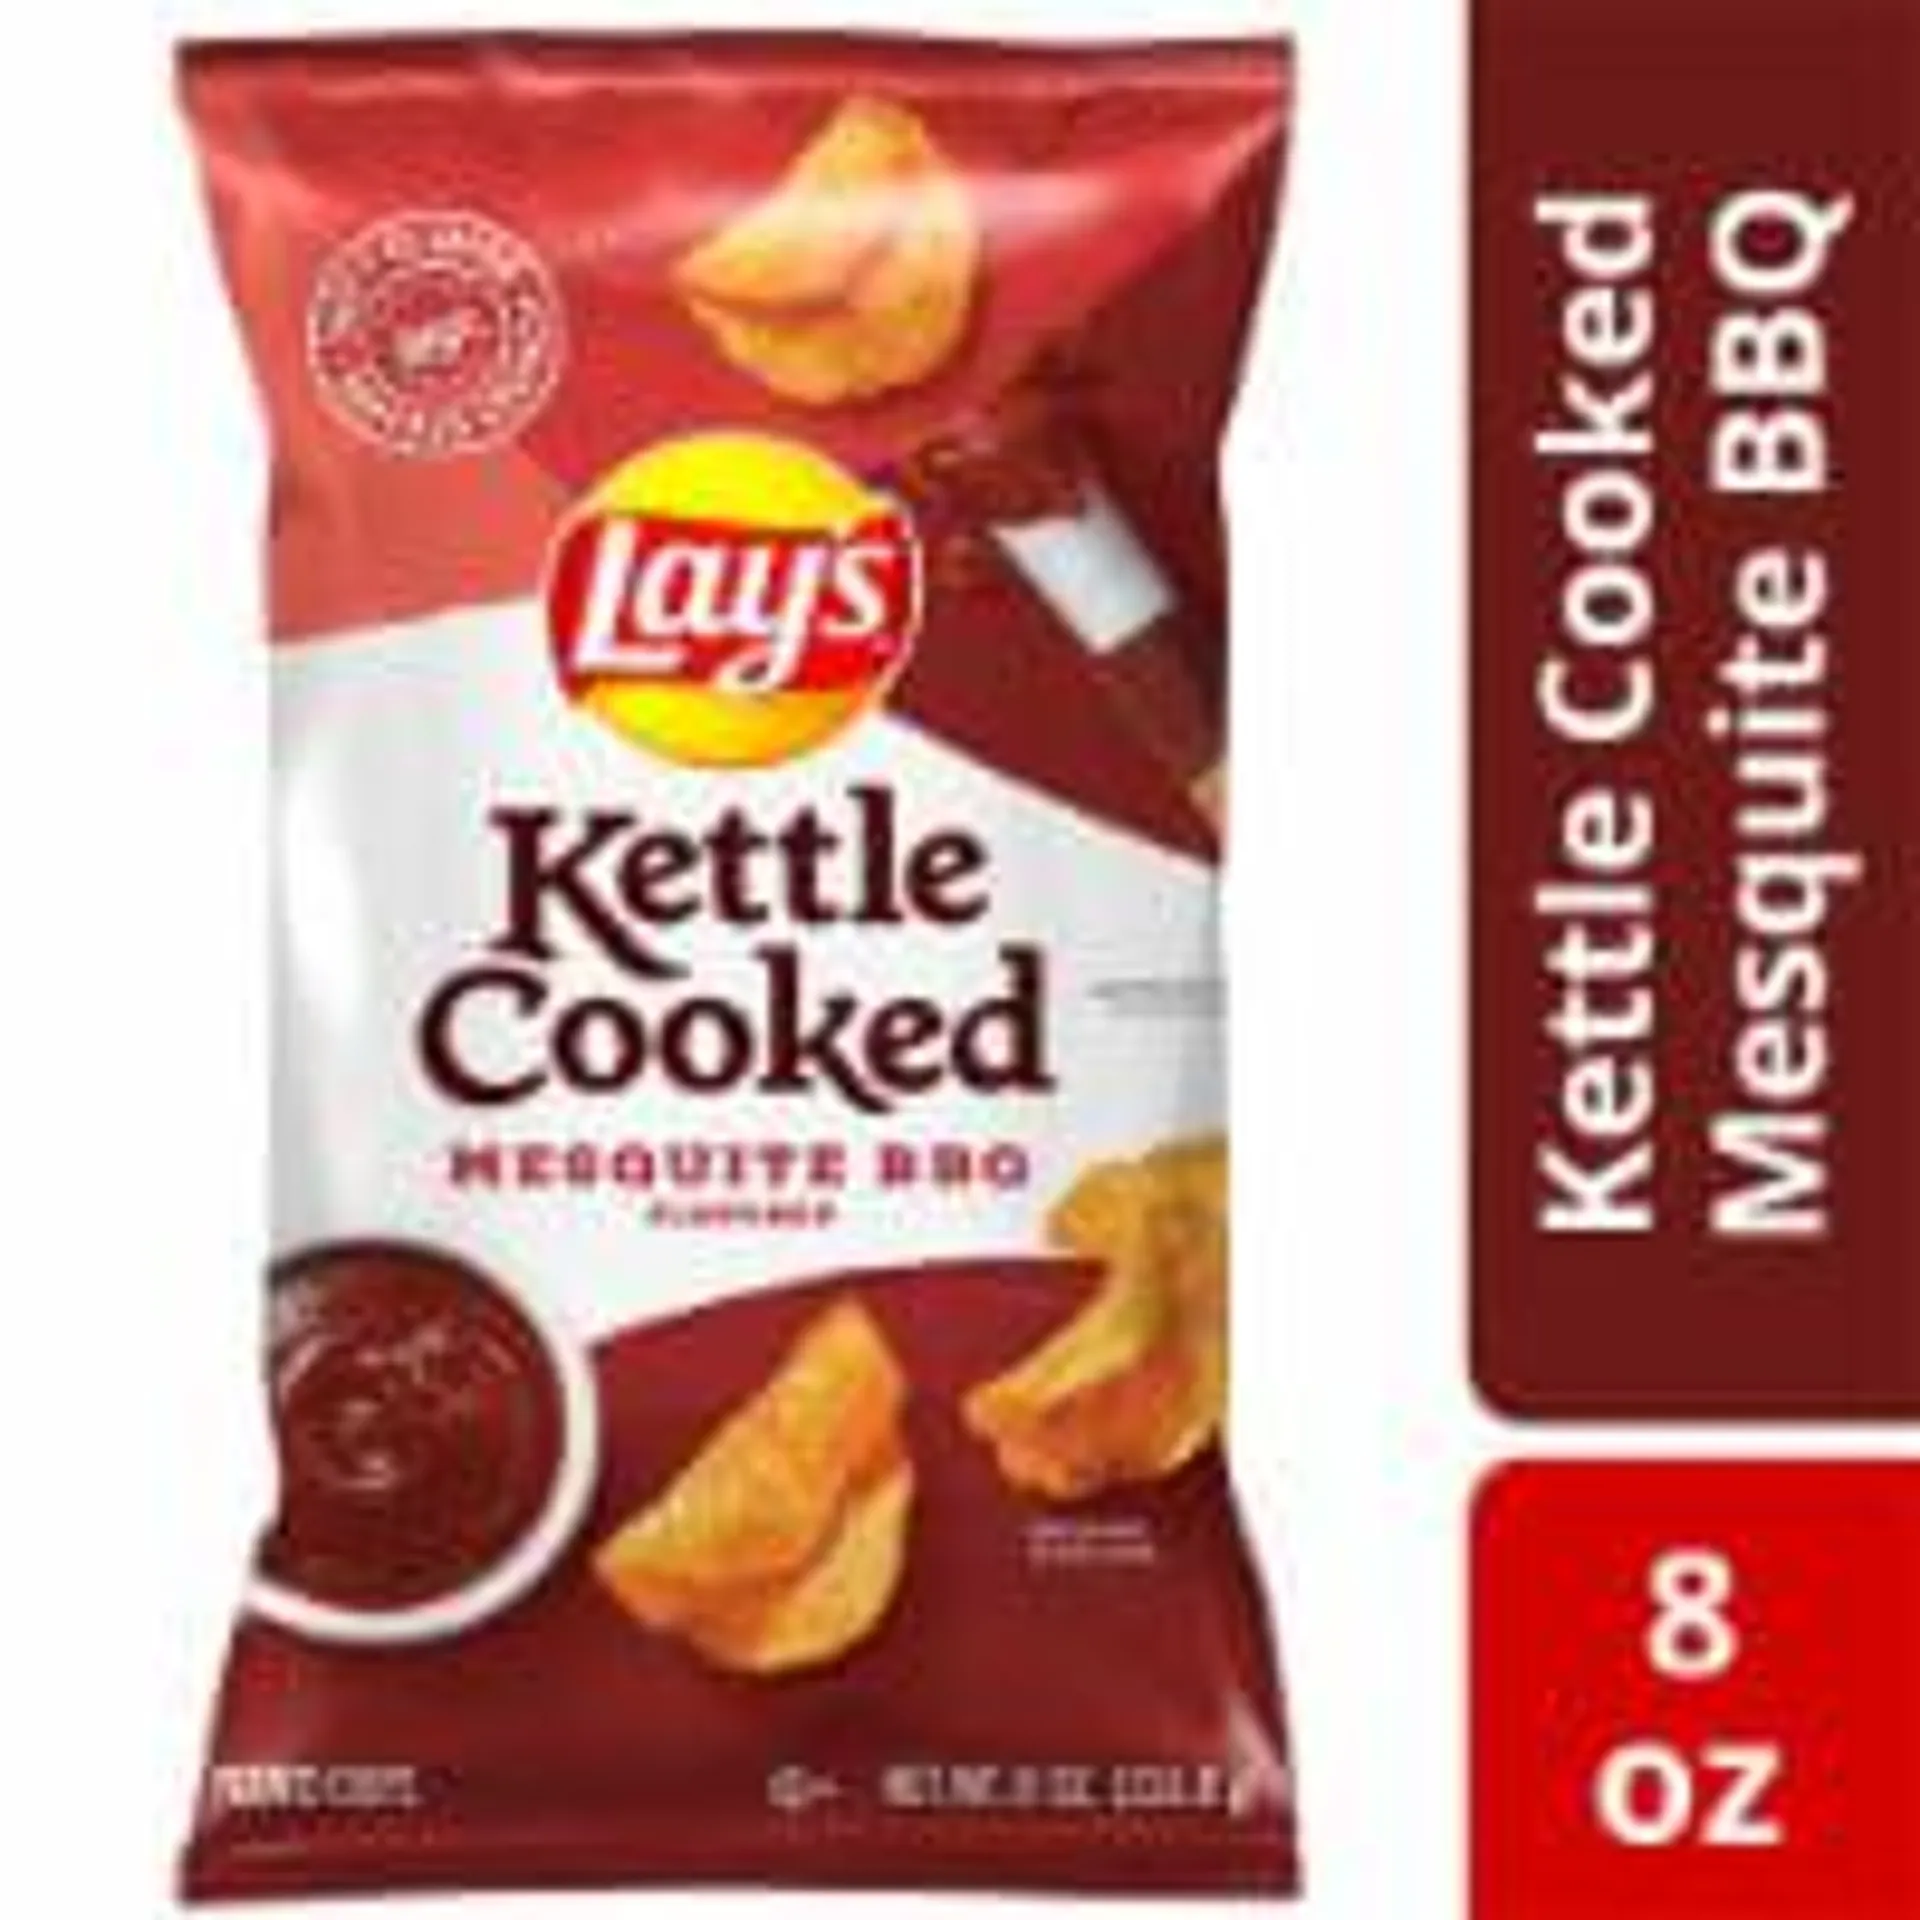 Lay's® Kettle Cooked Mesquite BBQ Kettle Potato Chips